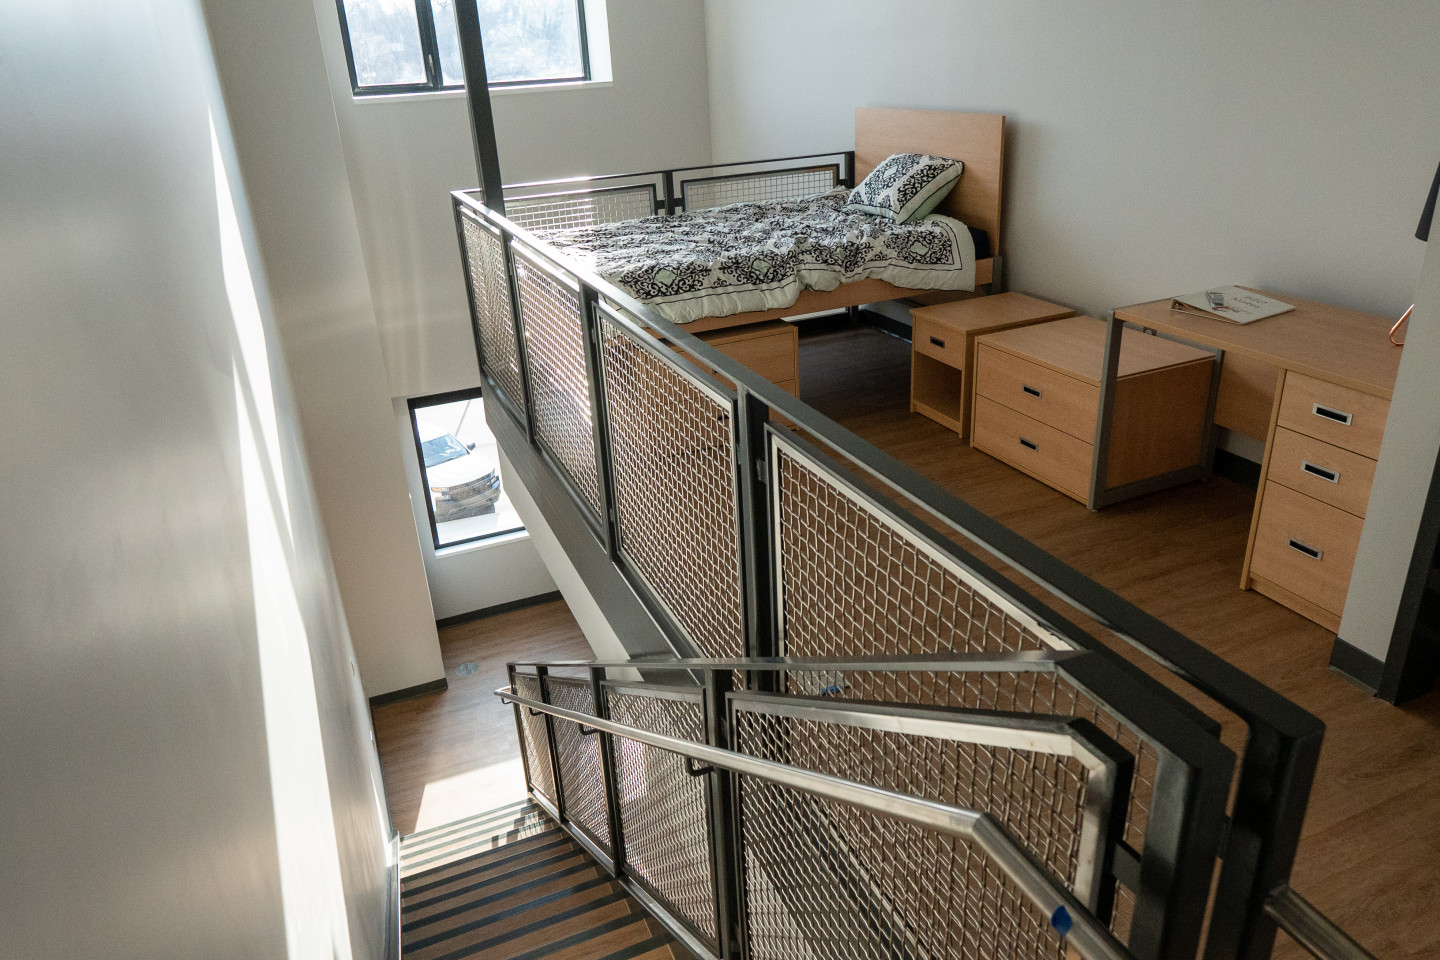 A bed in a loft area of an apartment.